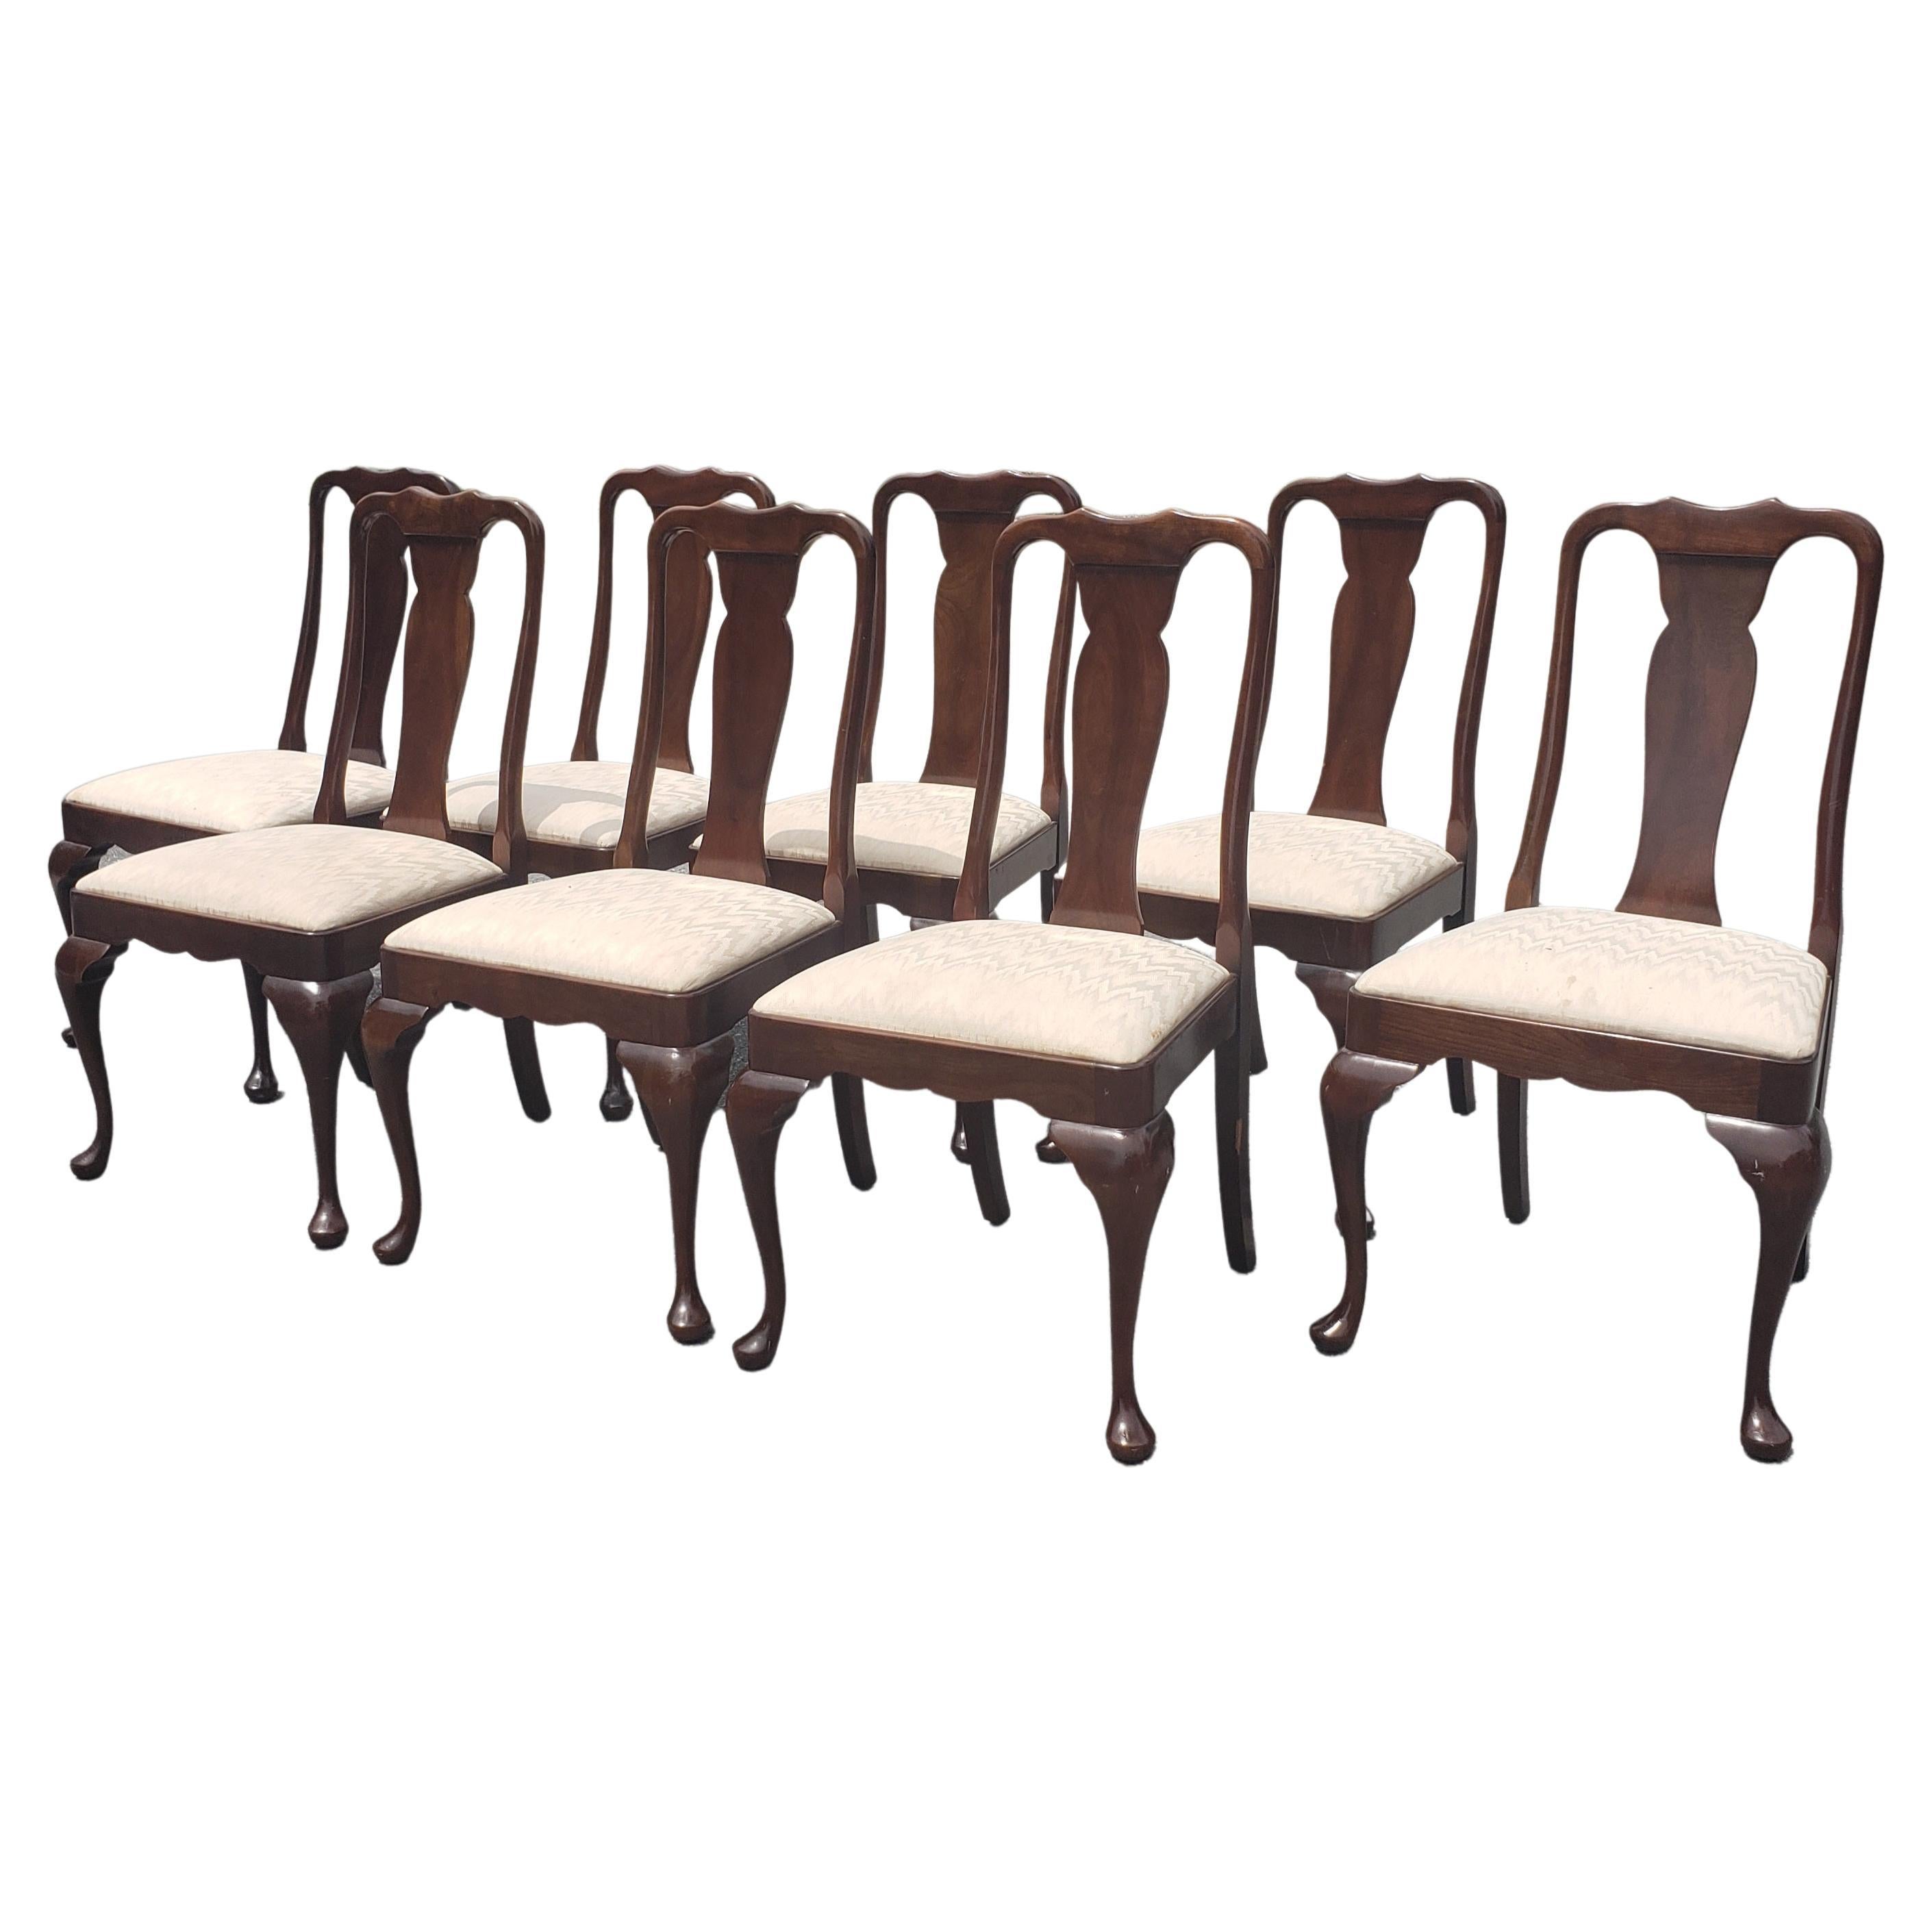 Set of 8 Stickley Queen Anne Anniversary collection cherry dining chairs. Circa 1989.
Very good vintage condition. Original upholstered seats in good vintage condition in Antiqued white / cream color. 
Measure 22 inches in width, 22 inches in